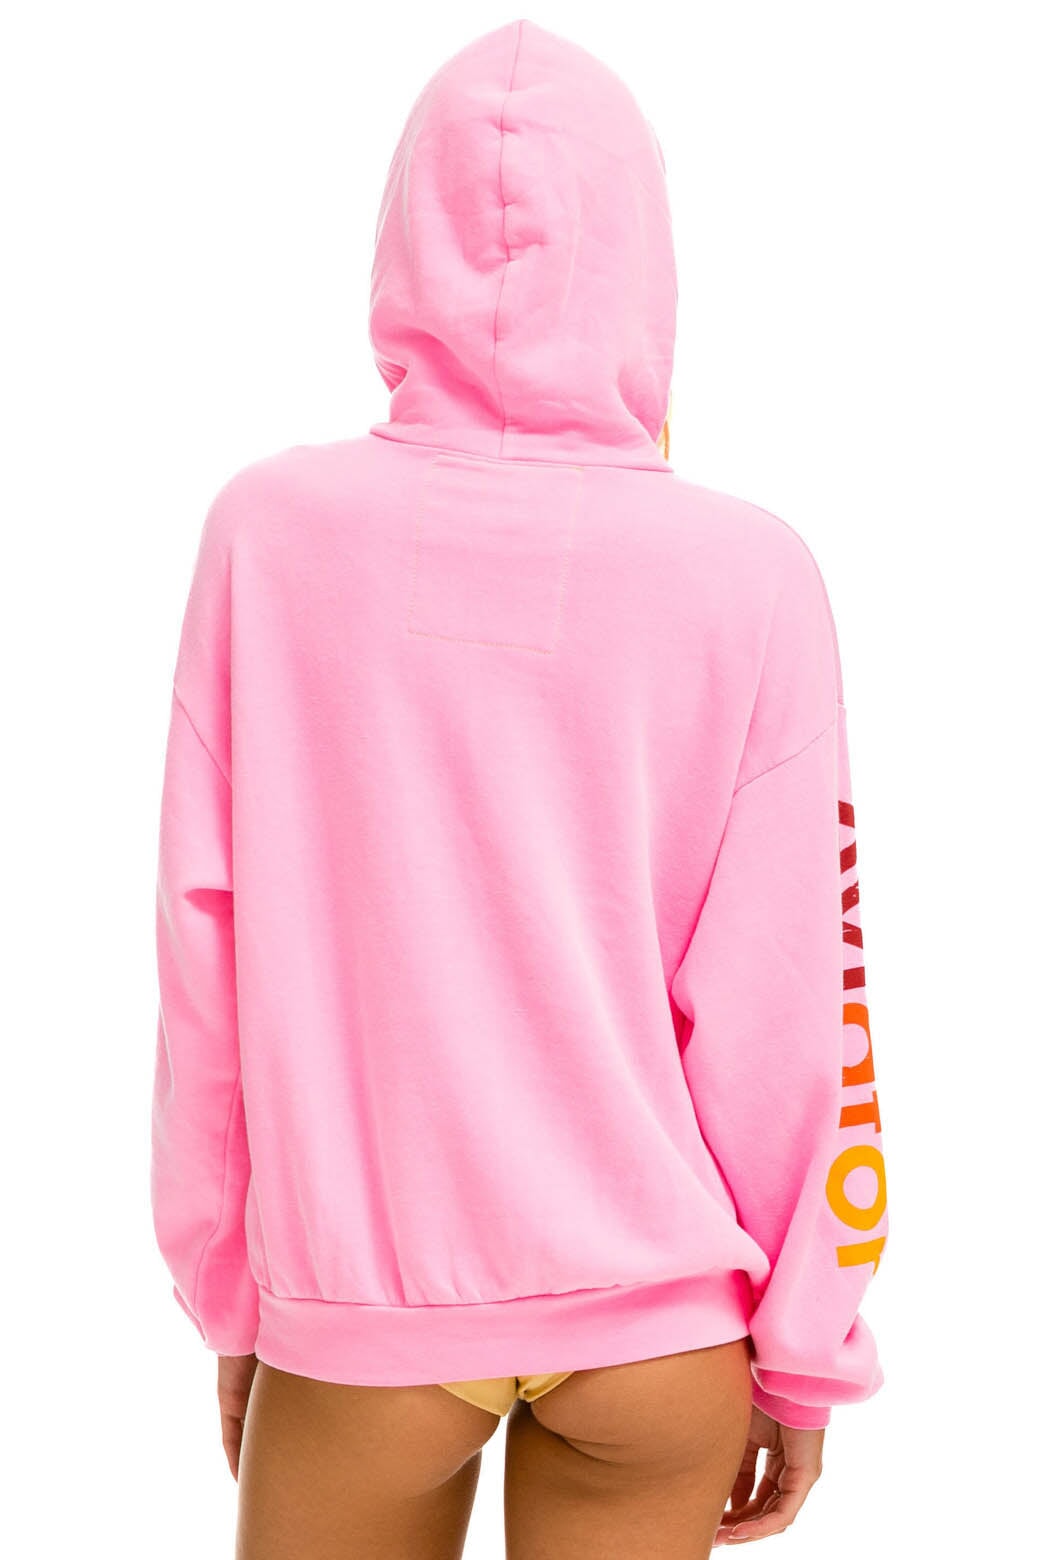 AVIATOR NATION RELAXED PULLOVER HOODIE - NEON PINK Hoodie Aviator Nation 